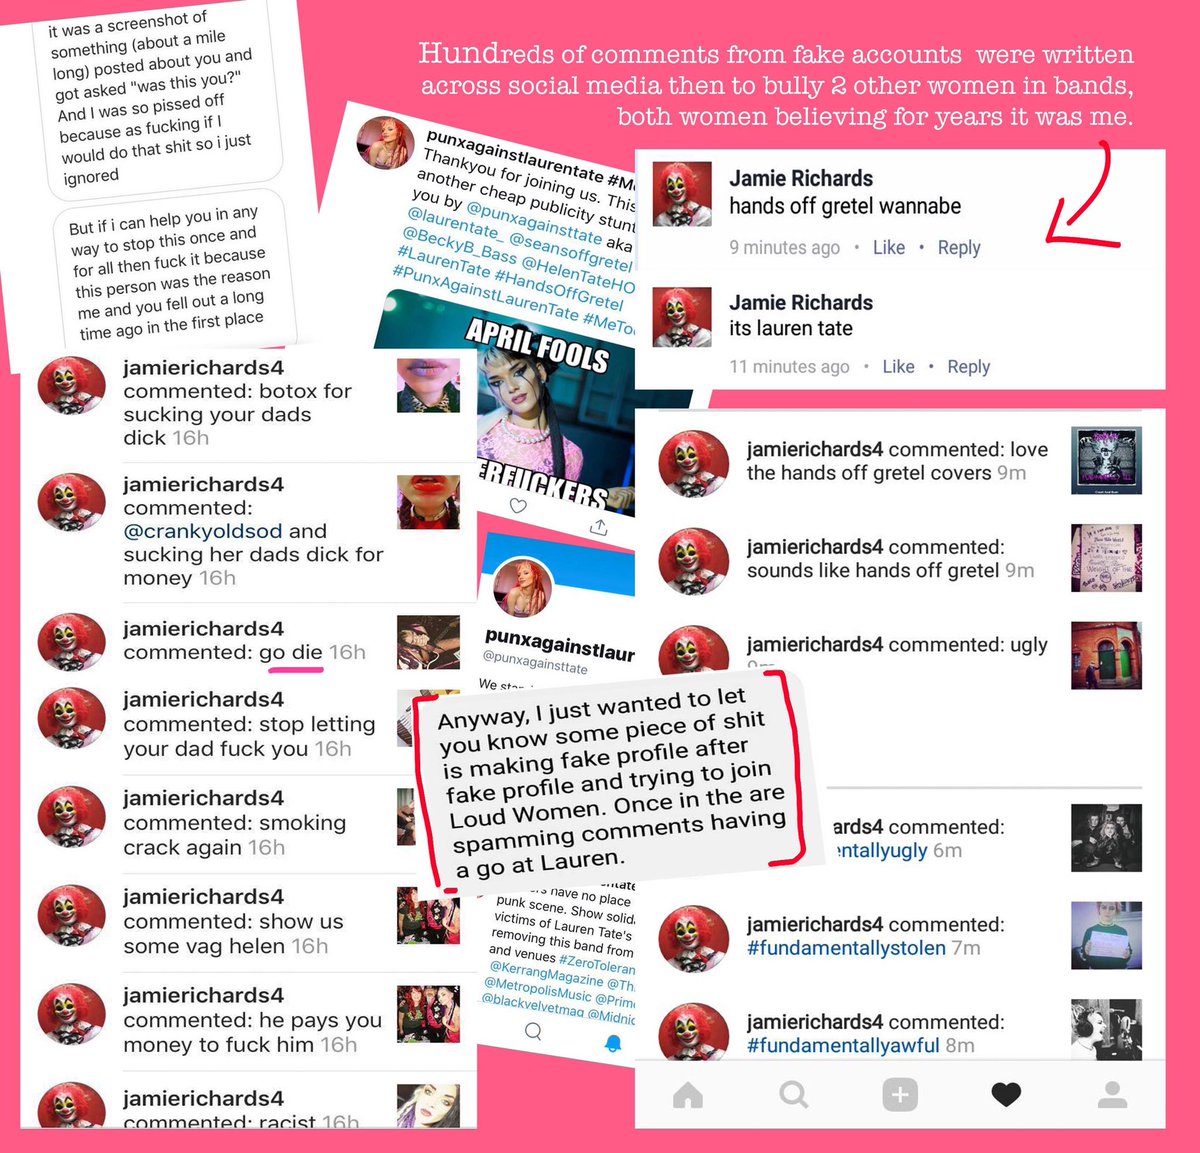 These screen shots also show more abuse I had to cope with in regards to other women in bands as I was accused of telling girls to kill themselves as this fake account posed as me. THIS IS THE END now   #timetoheal  #itsover